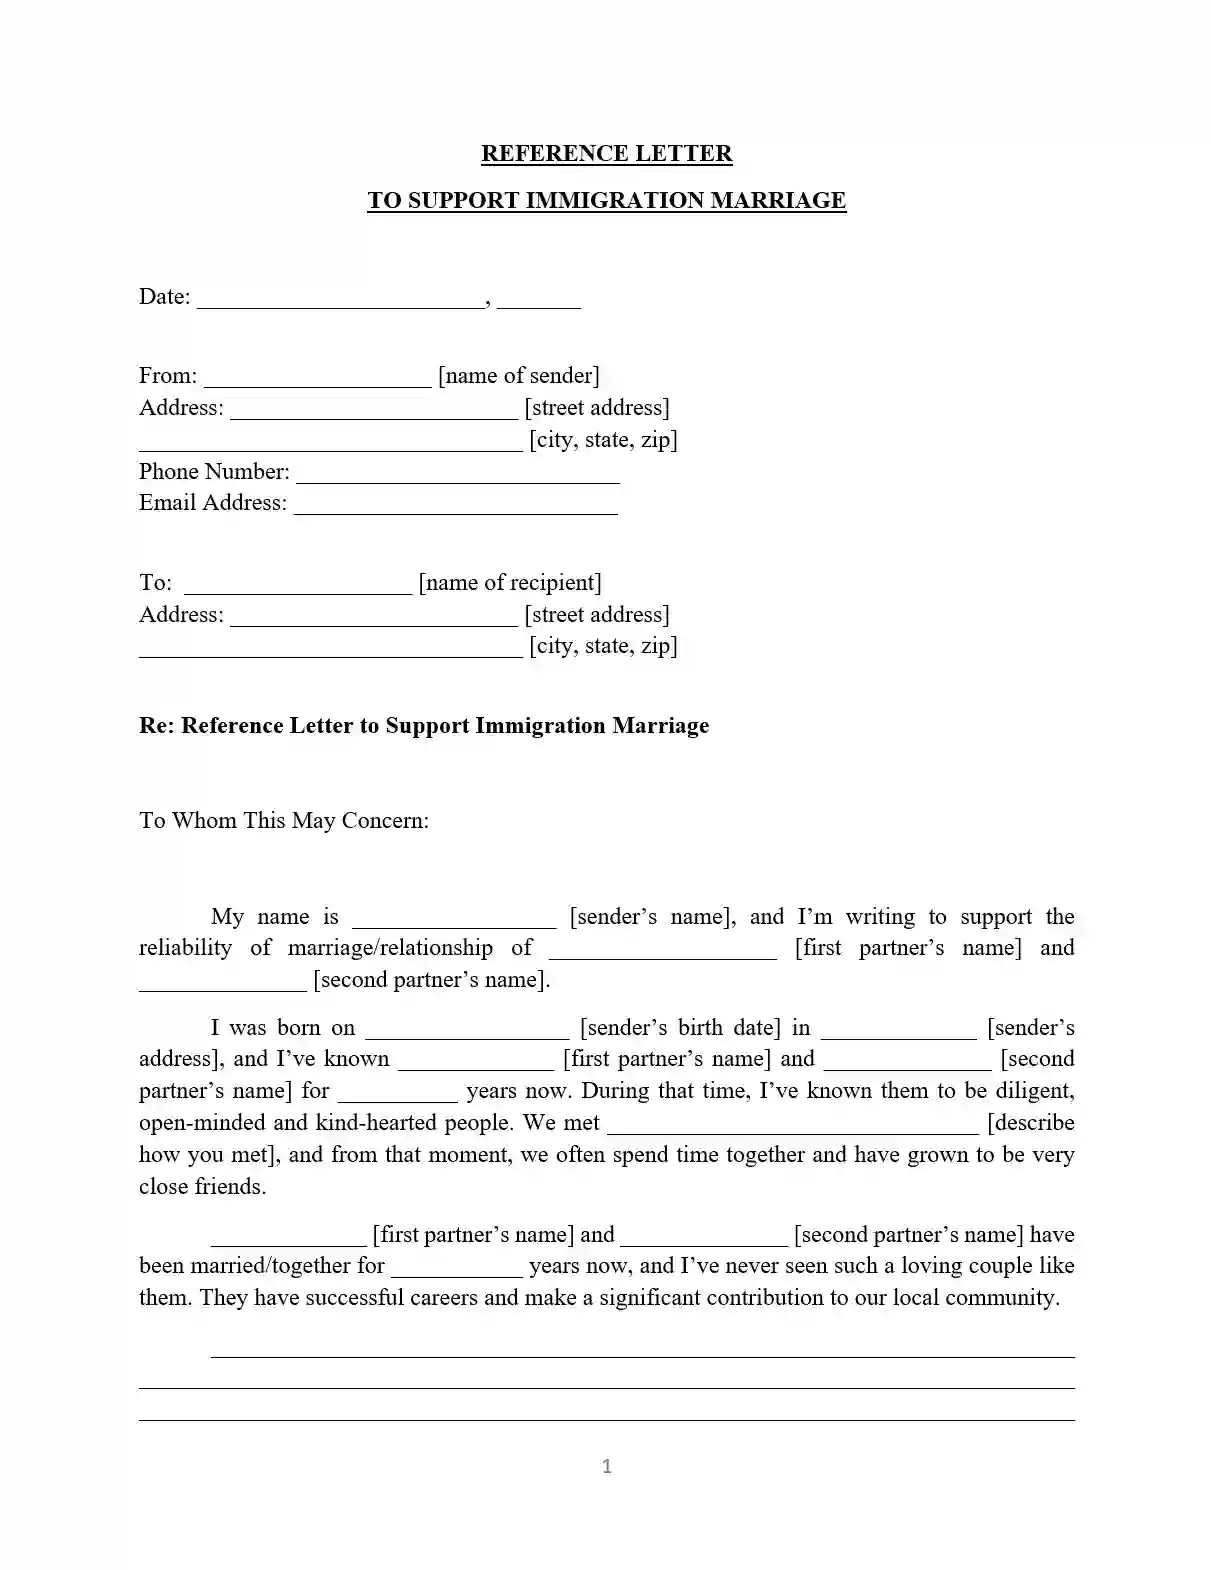 Reference Letter For Immigration Marriage + Samples